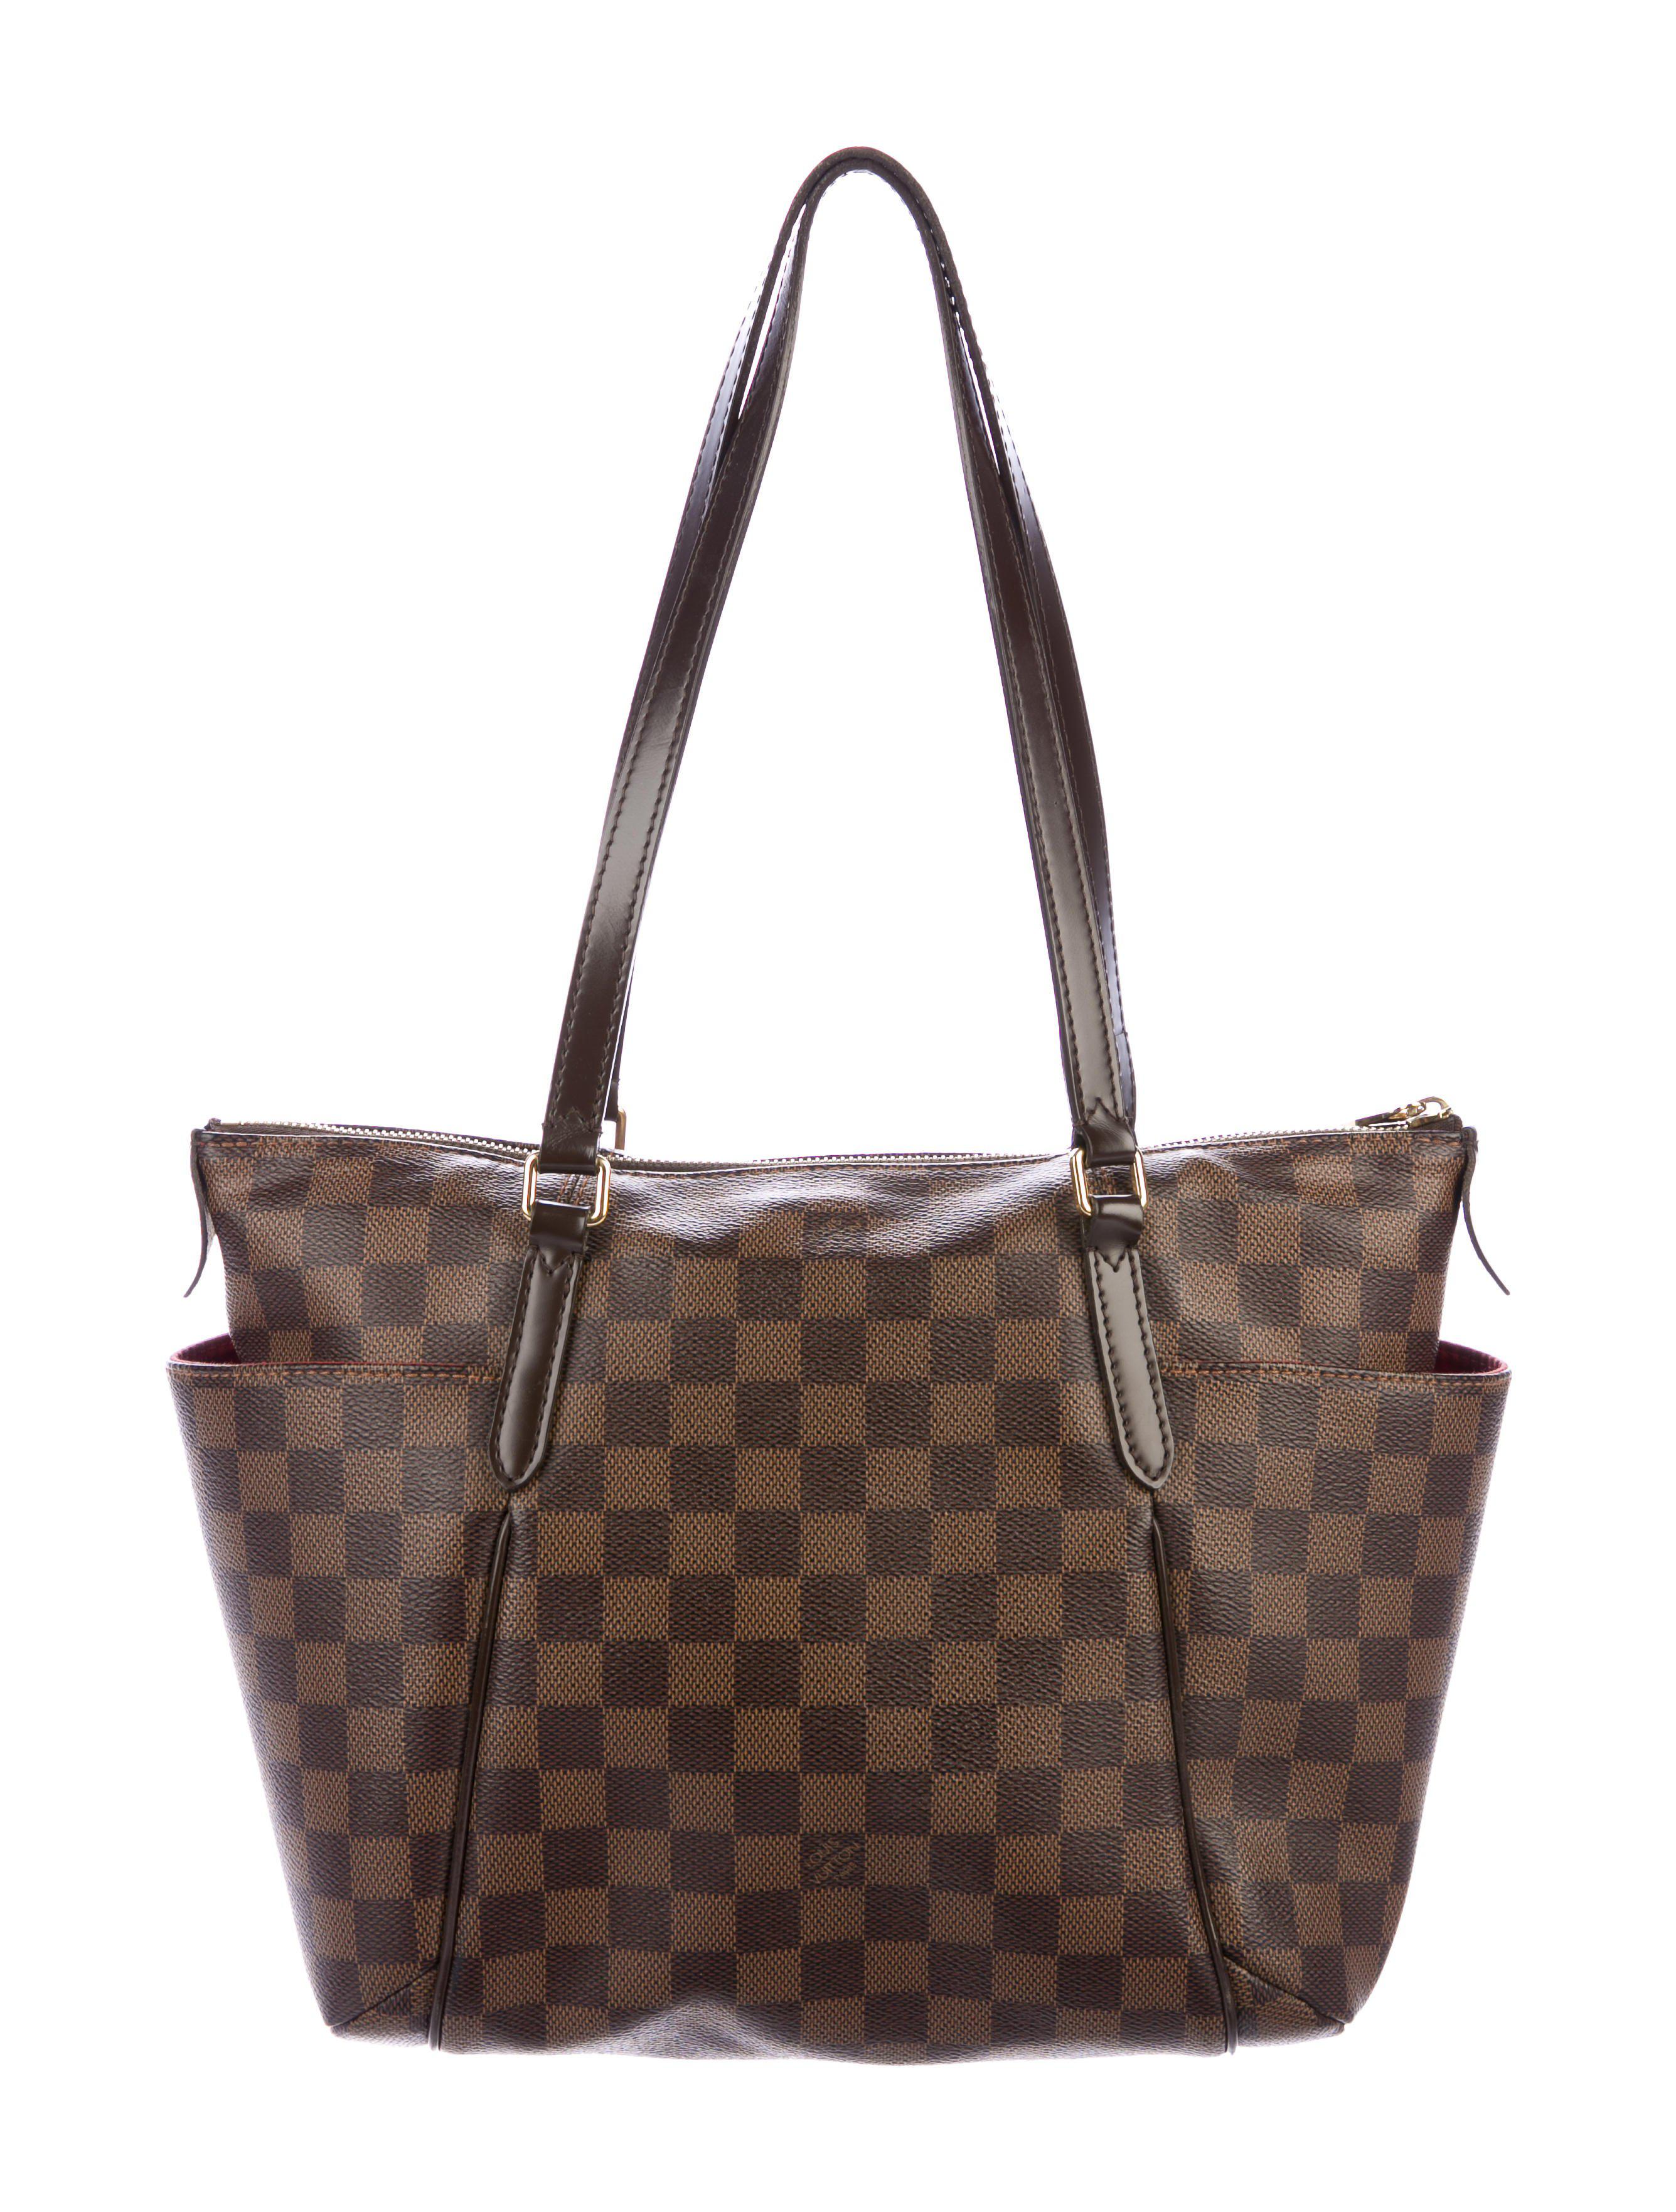 Lyst - Louis Vuitton Damier Ebene Totally Pm in Brown